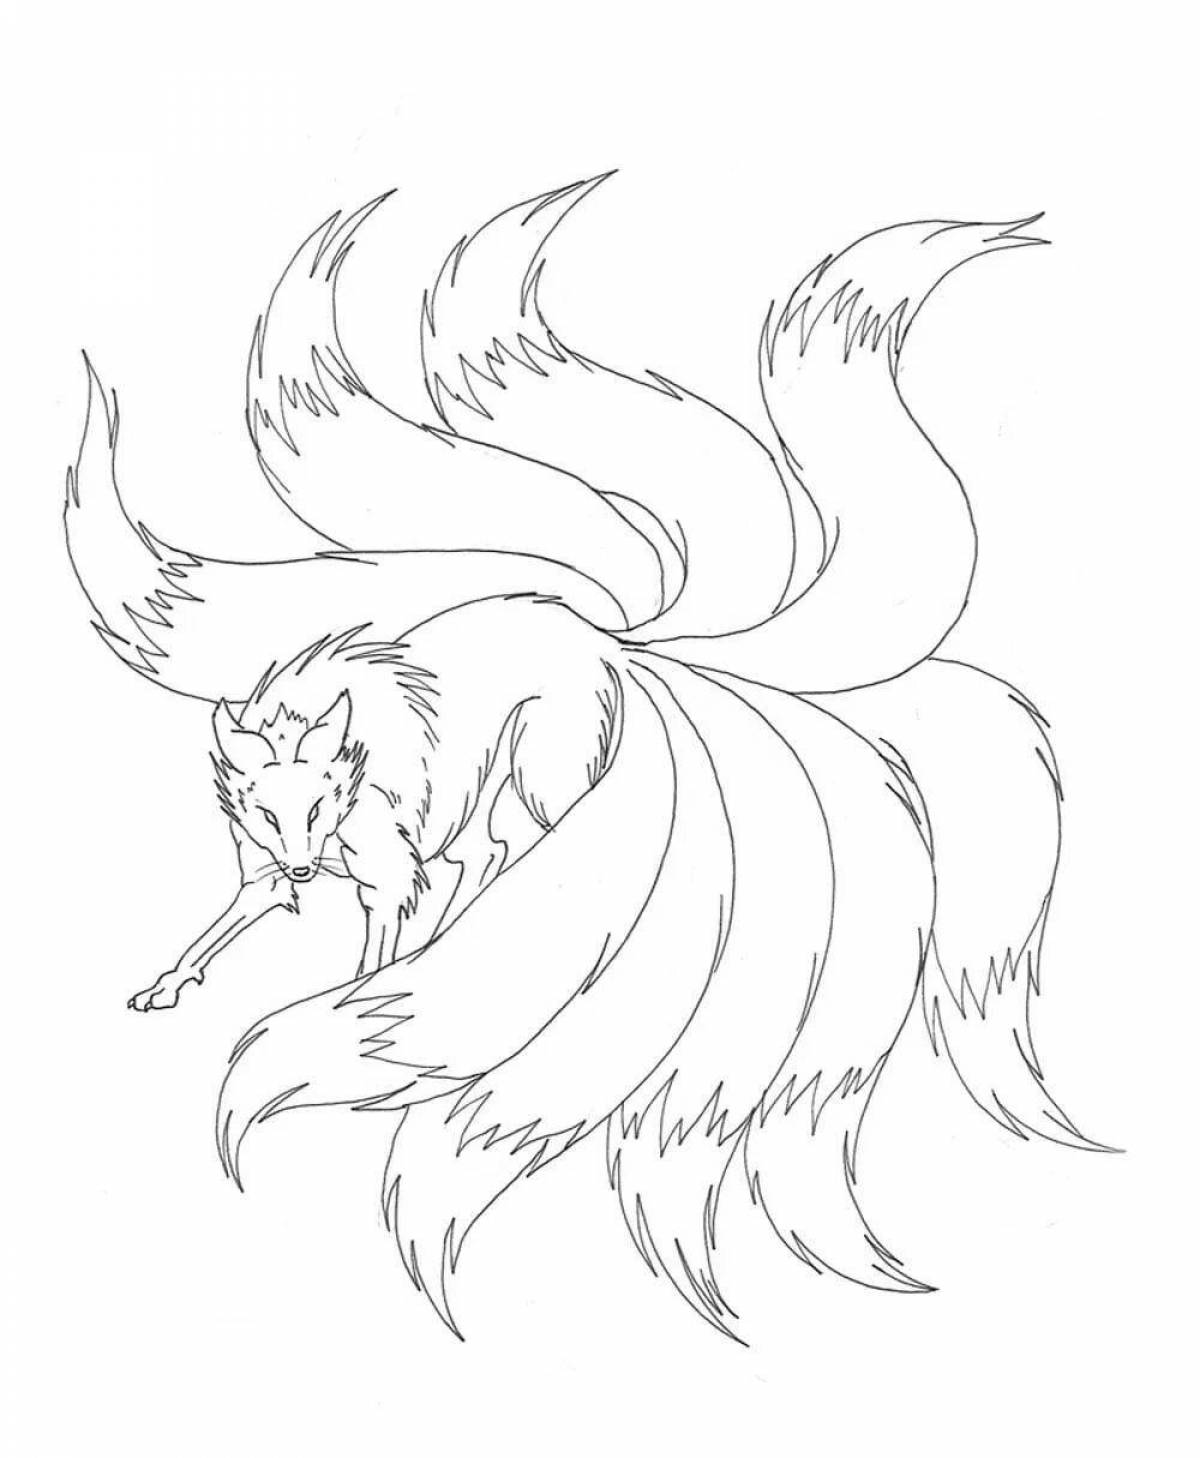 Delightful coloring with nine tails